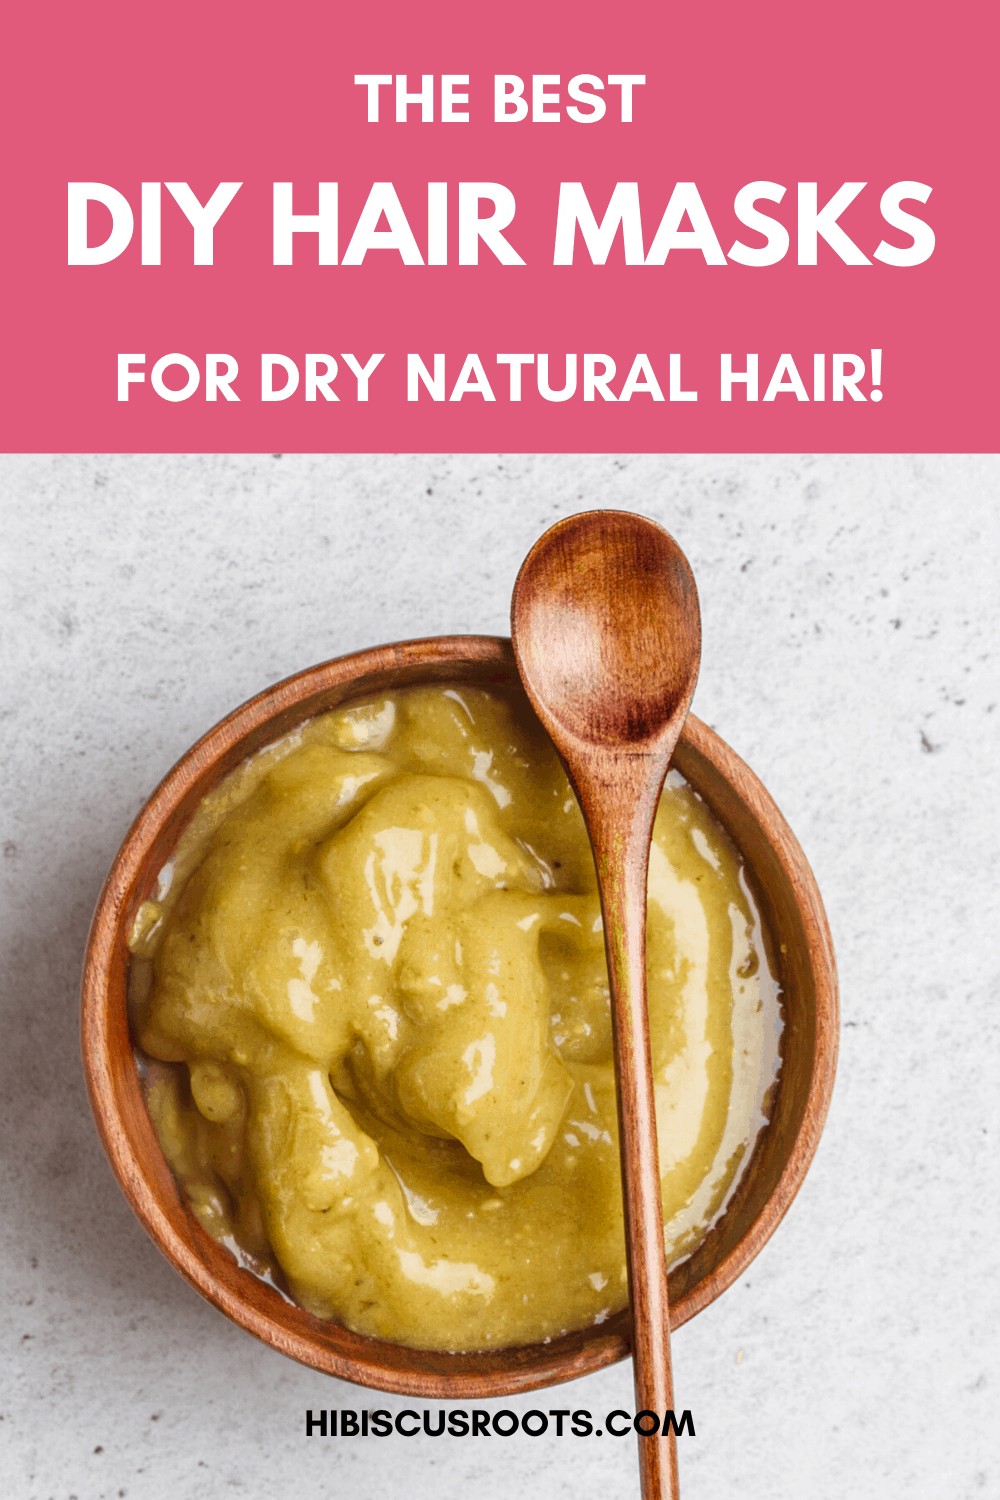 5 DIY Hair Mask Recipes for Extremely Dry Natural Hair!